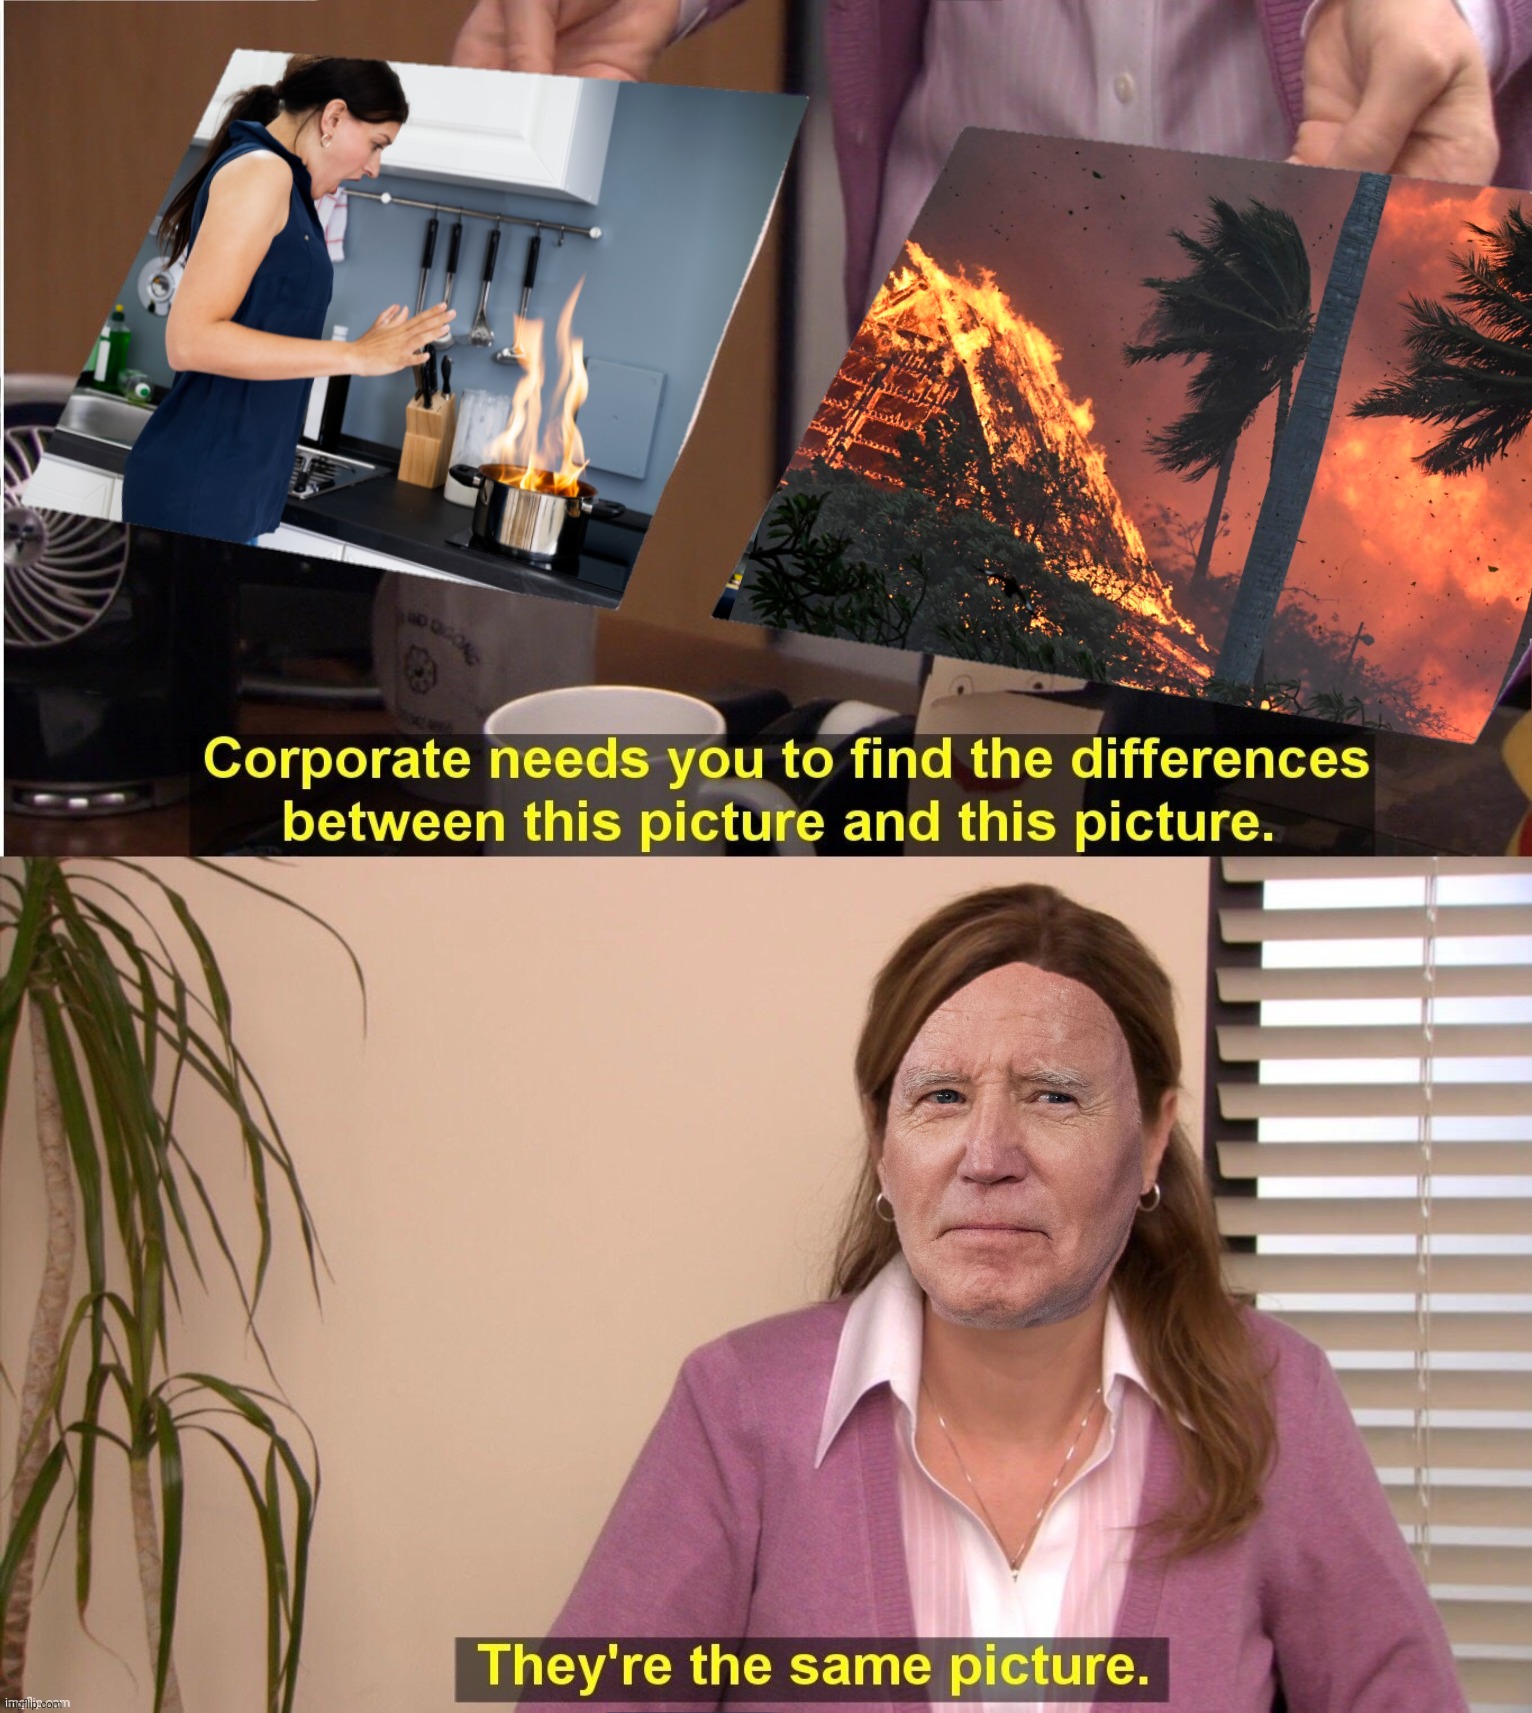 When you almost lost your car and your cat to a small, confined fire...oh, and your wife | image tagged in bad photoshop,joe biden,they're the same picture,maui fire,fire | made w/ Imgflip meme maker